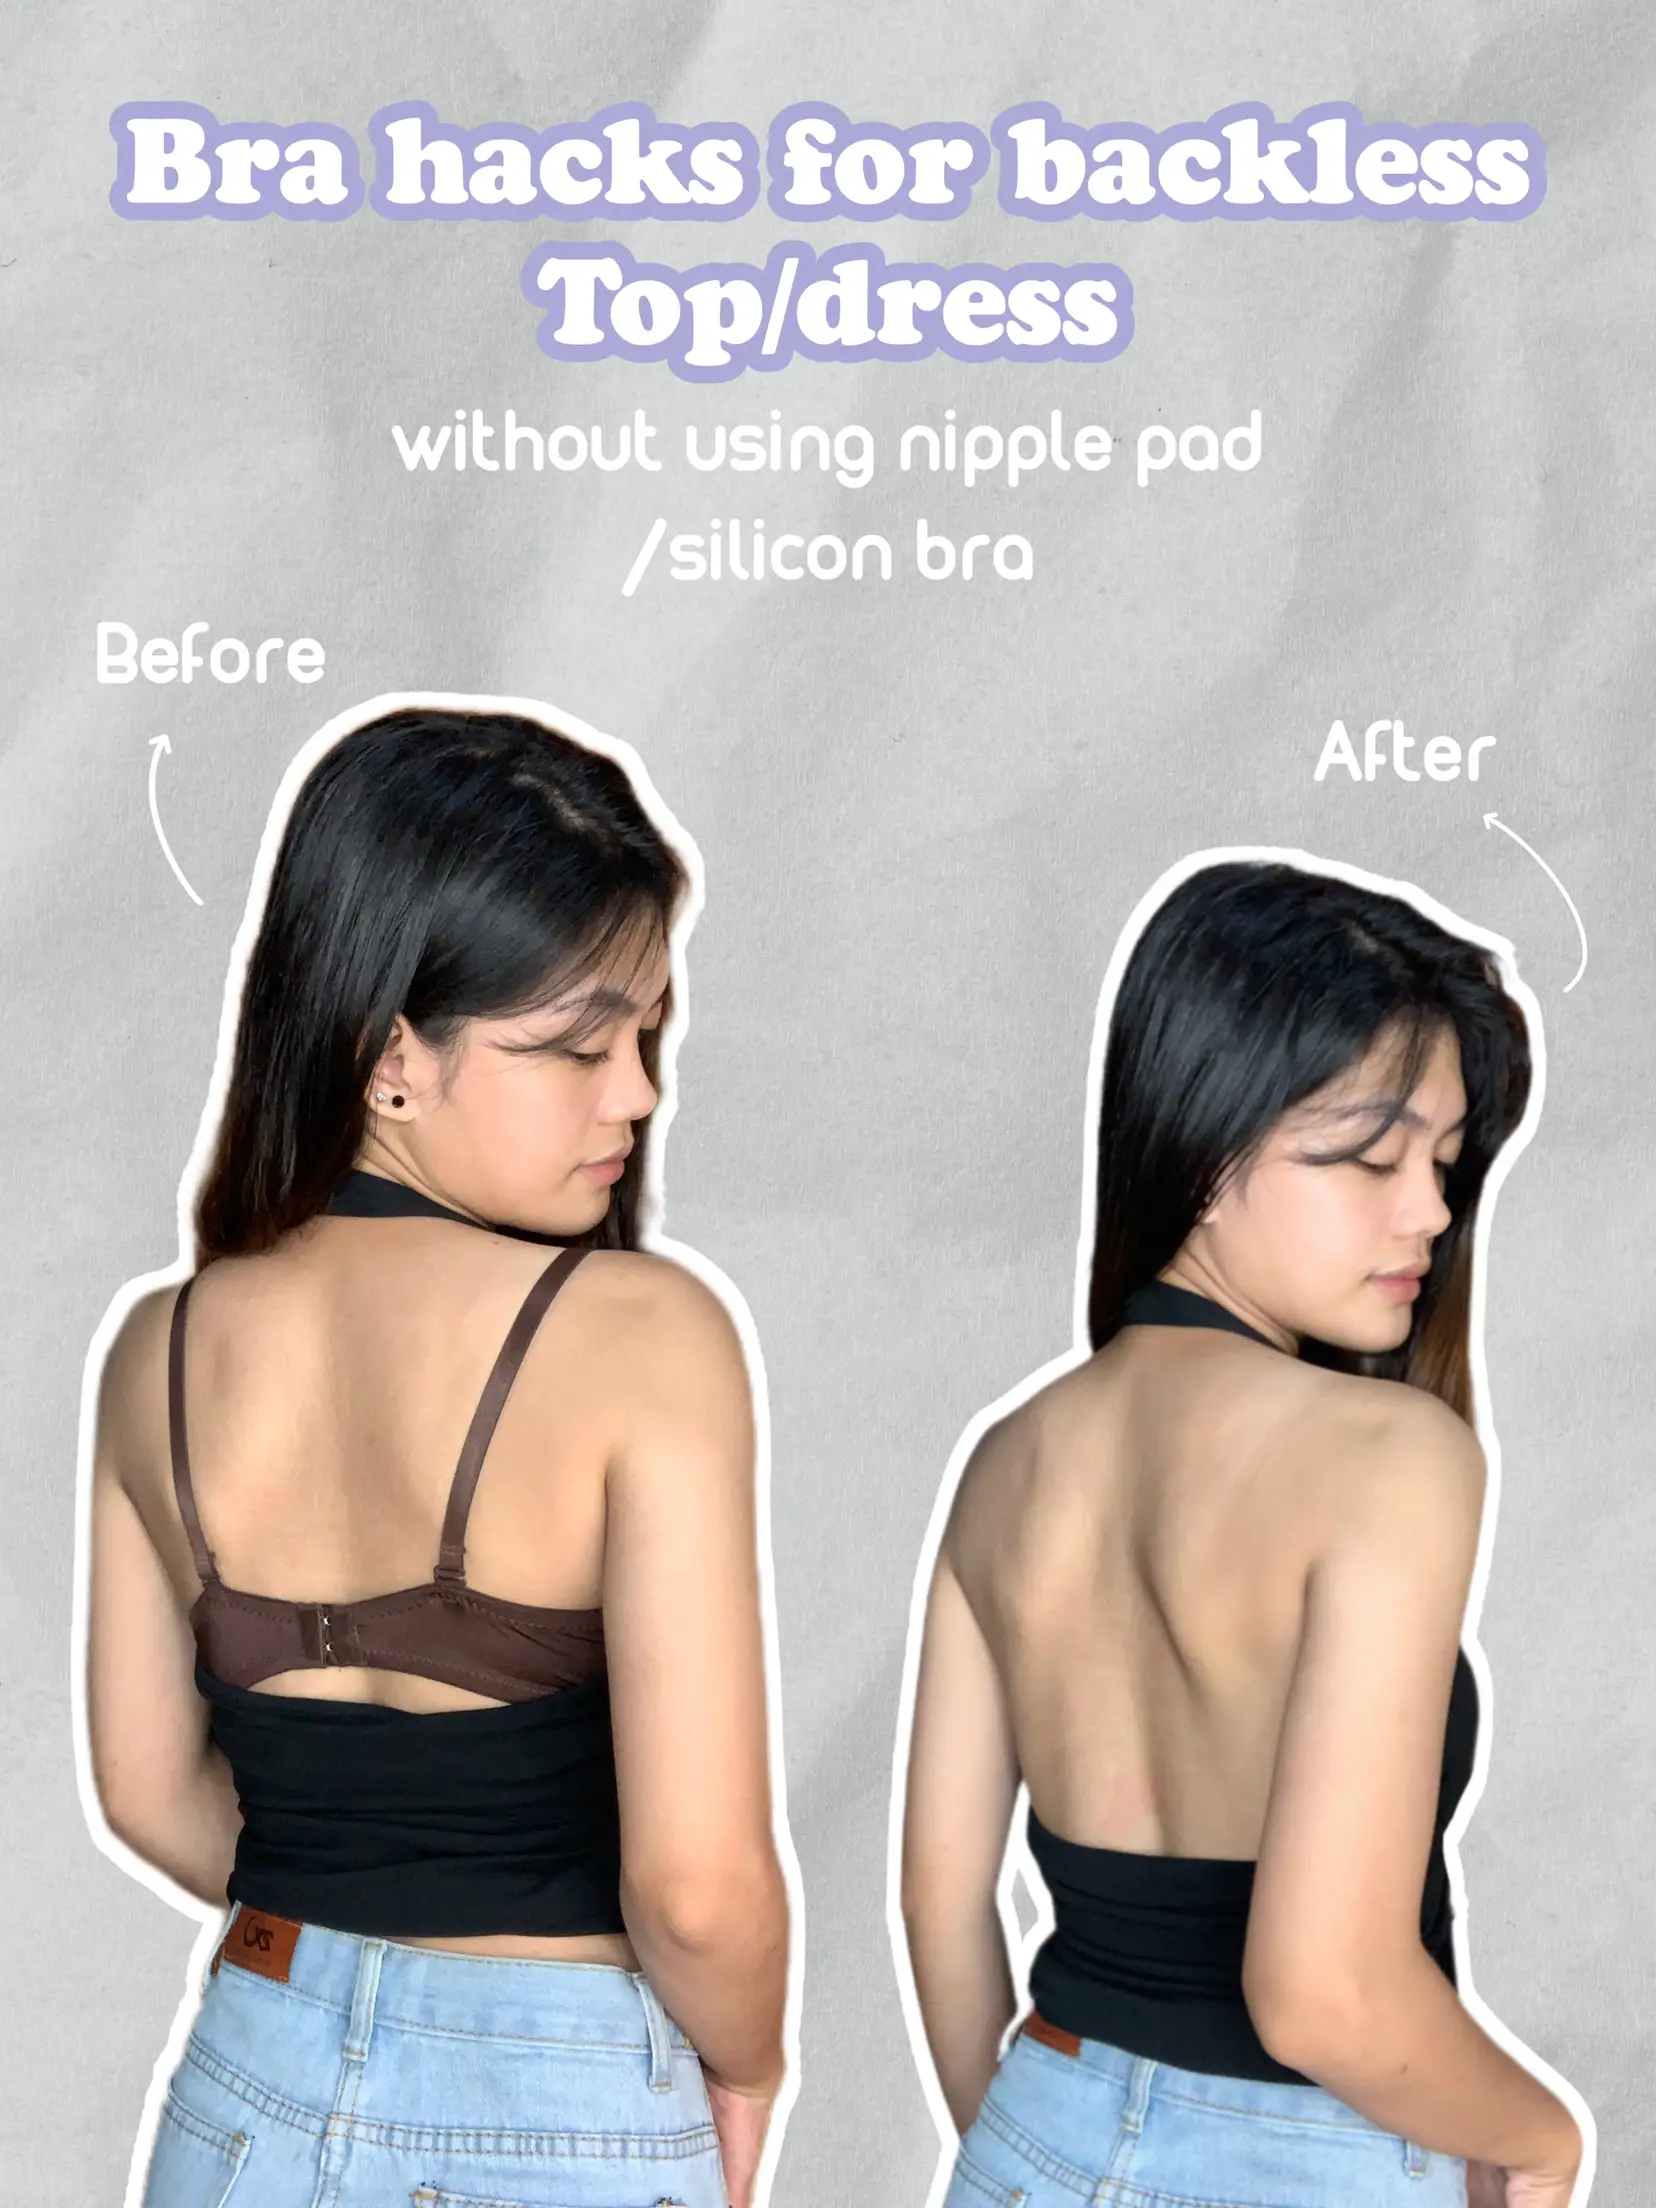 BRA HACKS FOR BACKLESS TOP/DRESS WITHOUT USING NIP